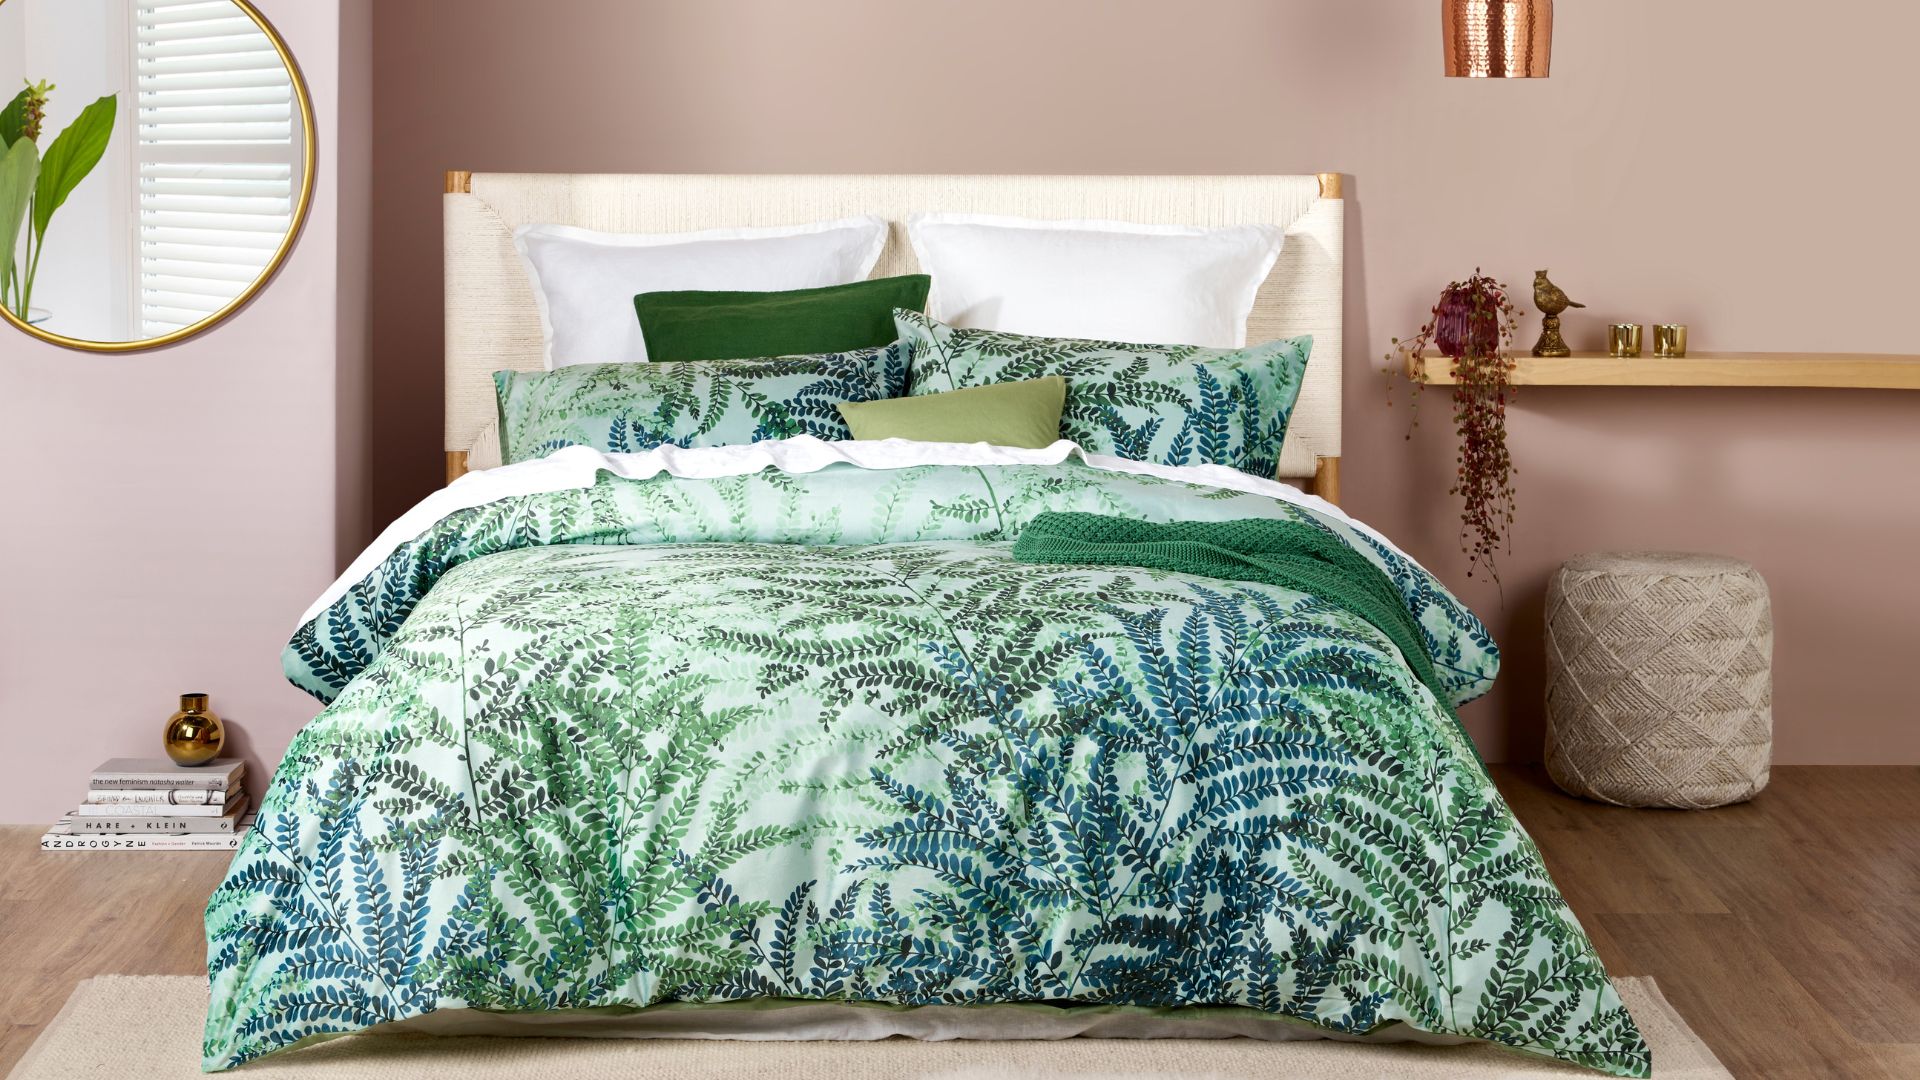 Styling a Tropical Bedroom with KOO